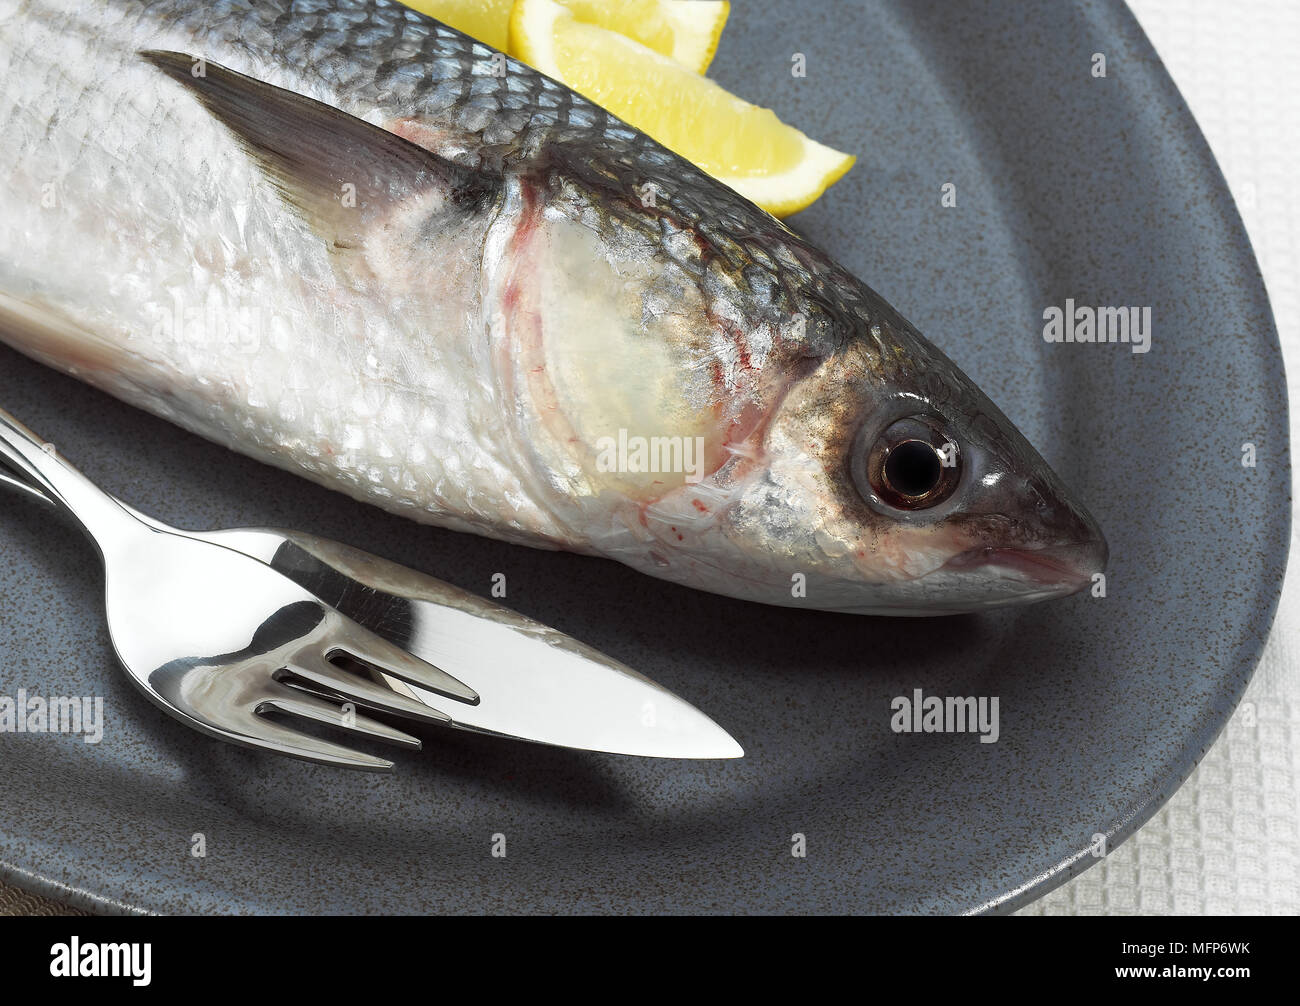 Mullet, chelon labrosus, Fresh Fish with Lemon on Plate 064967 Gerard LACZ Images Stock Photo